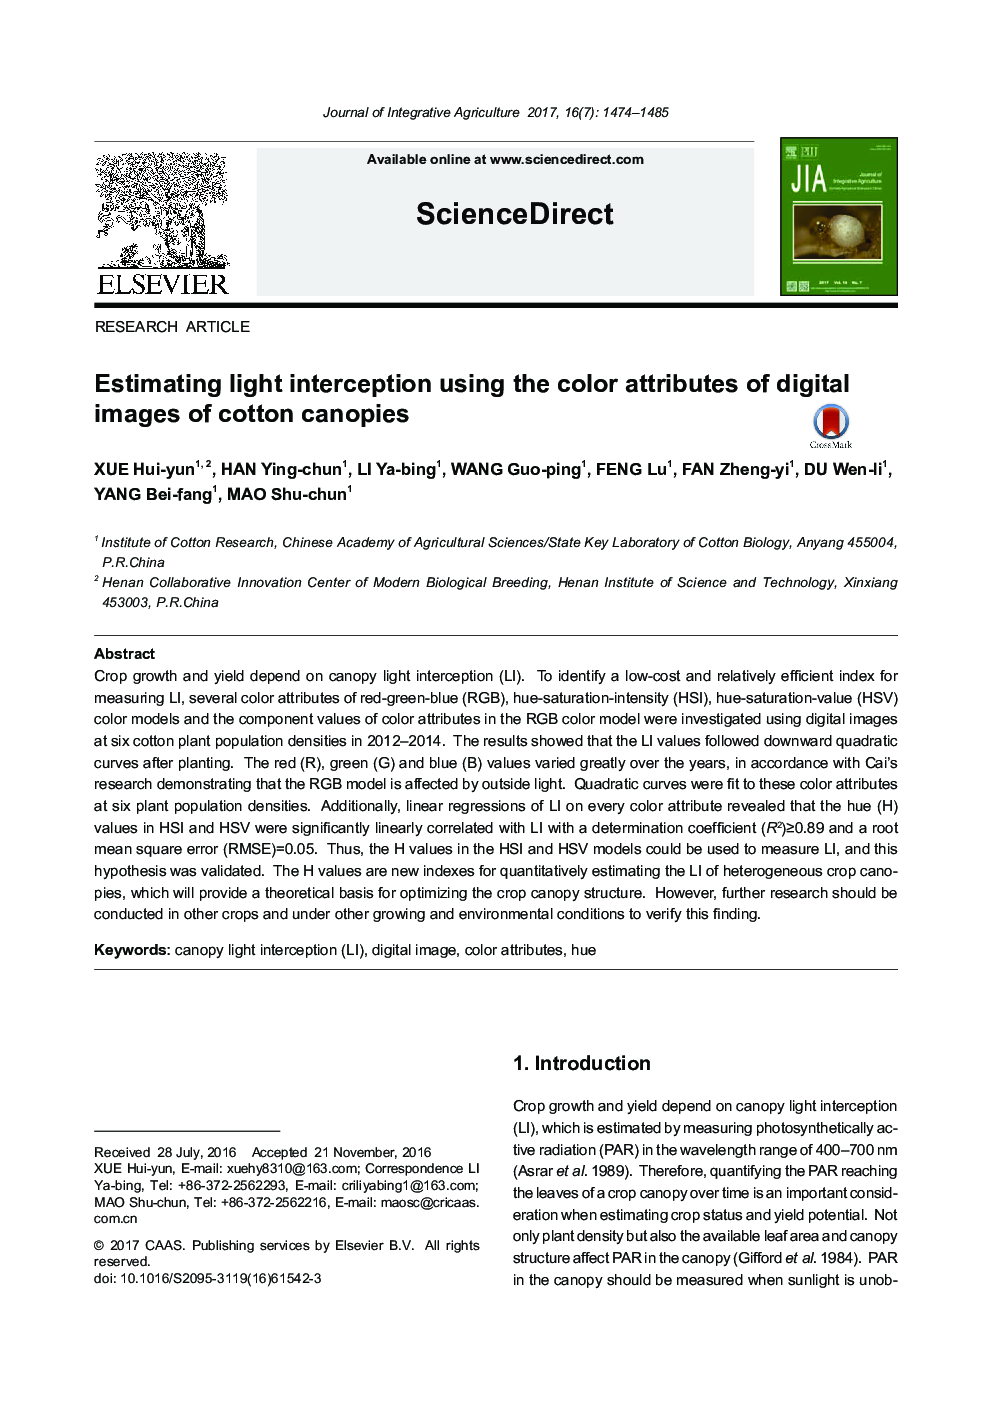 Estimating light interception using the color attributes of digital images of cotton canopies